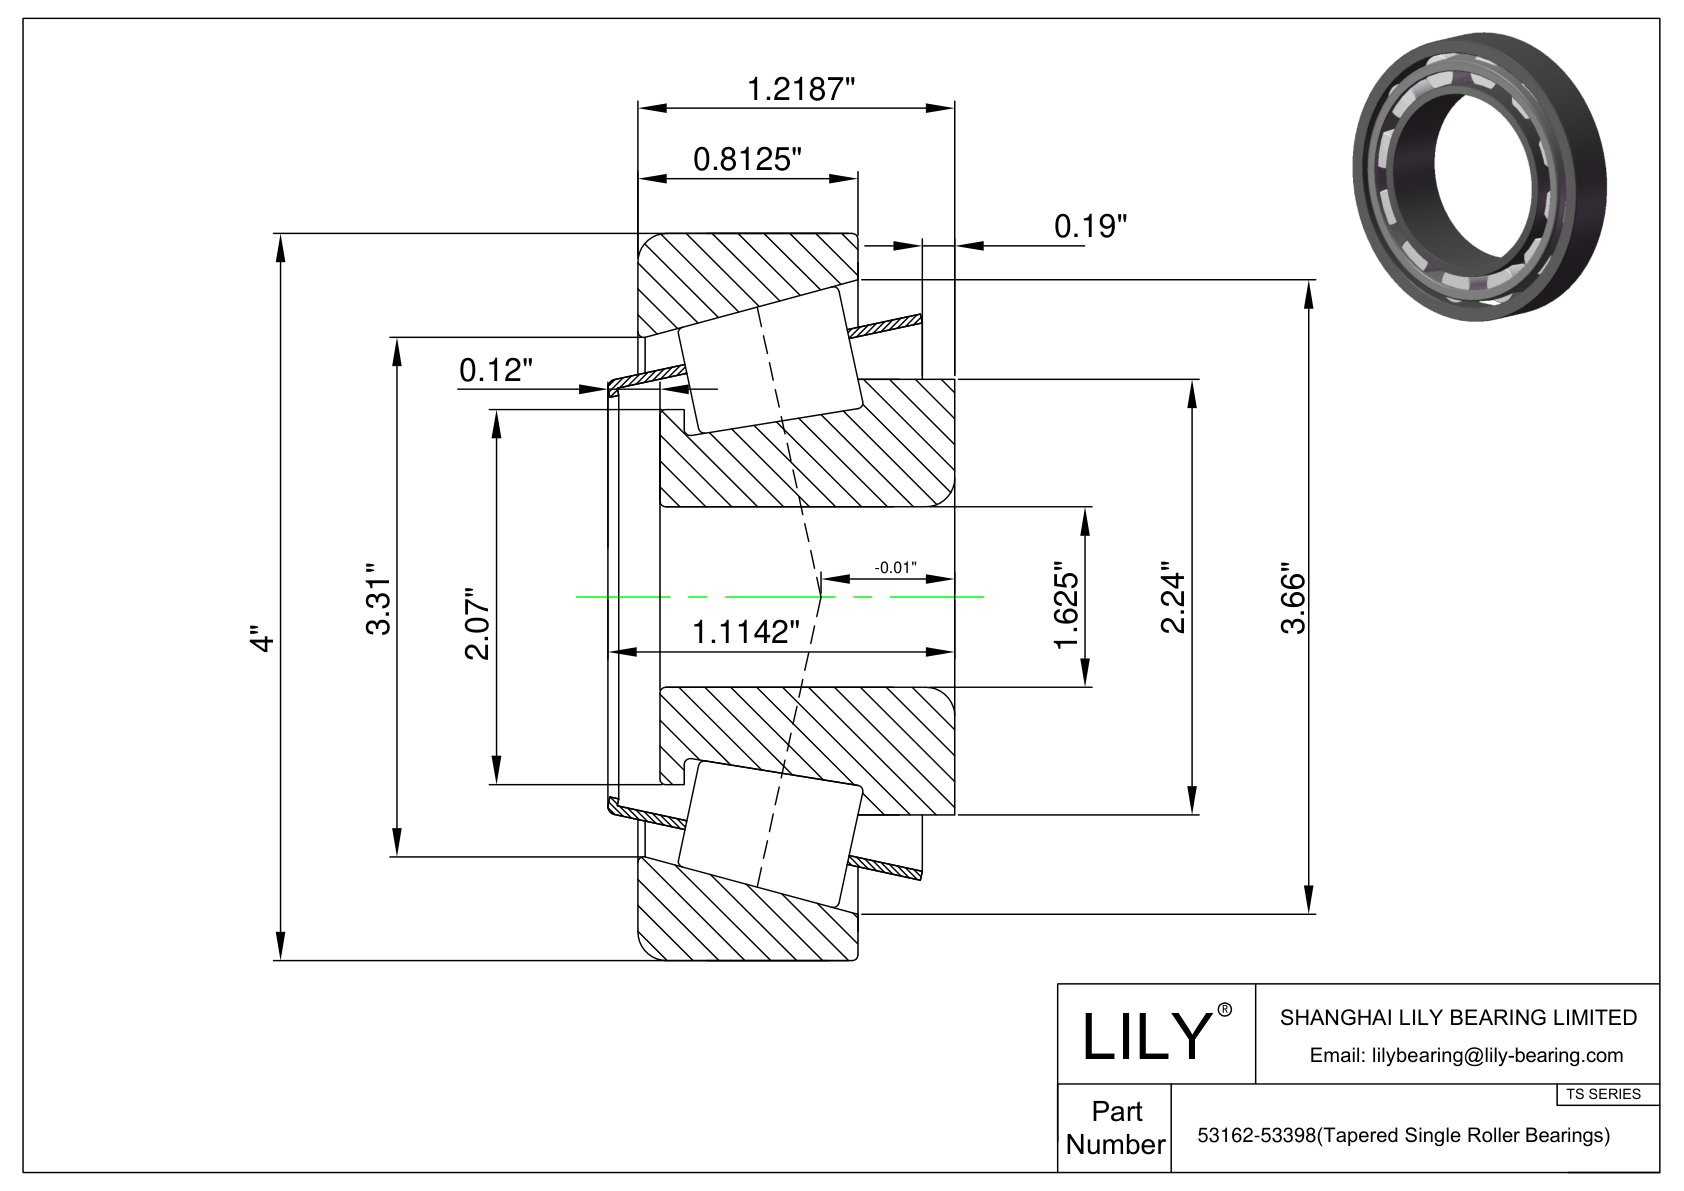 53162-53398 TS (Tapered Single Roller Bearings) (Imperial) cad drawing